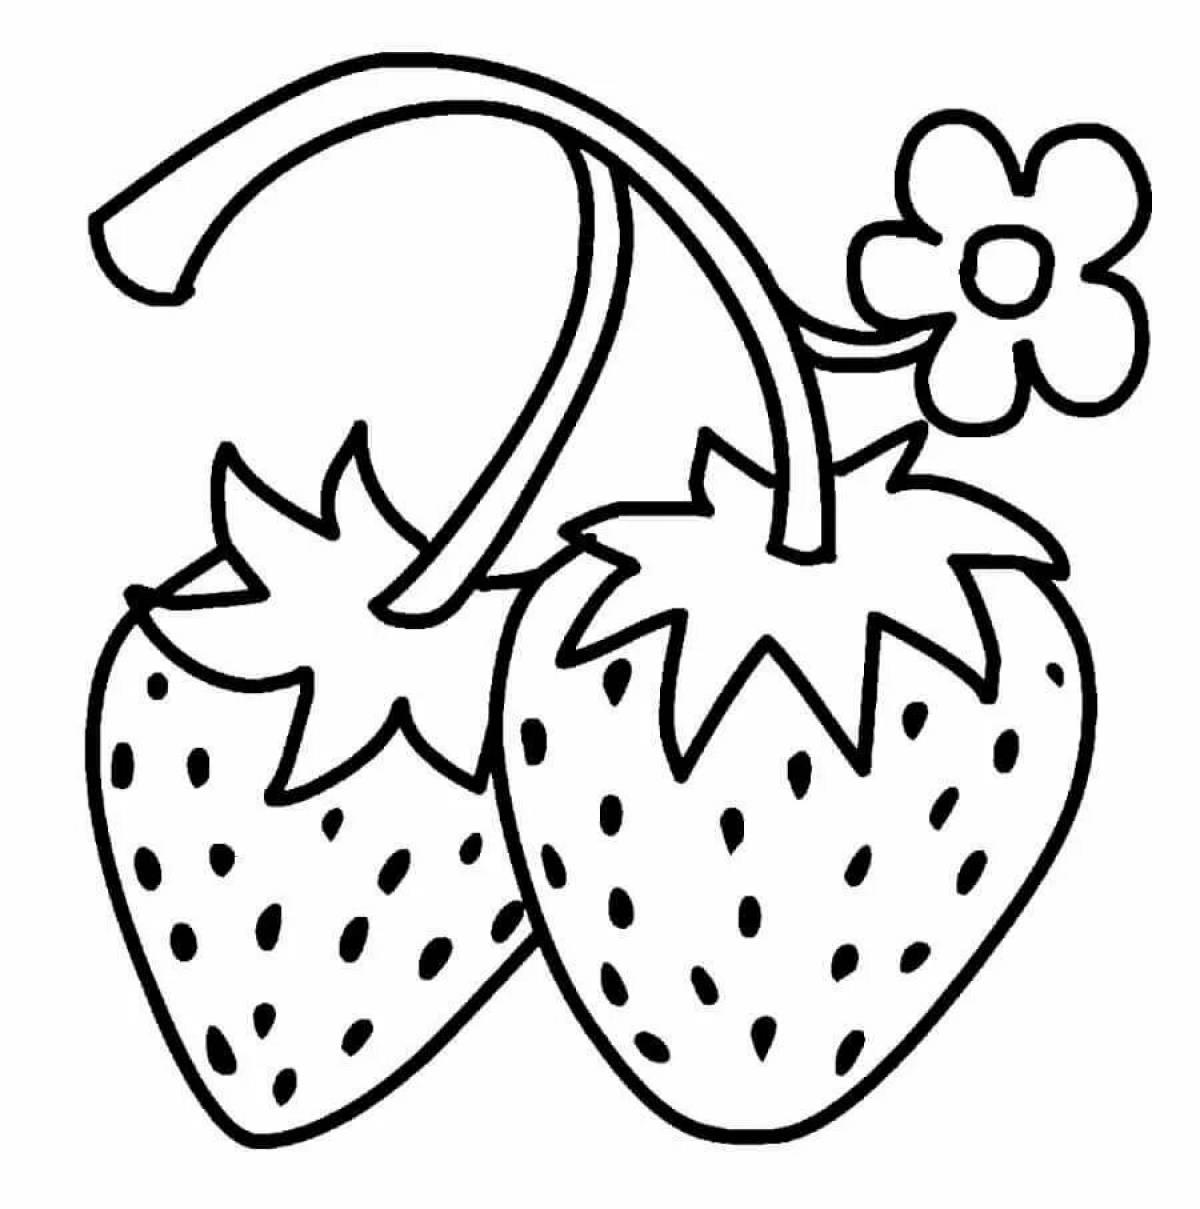 Amazing strawberry coloring page